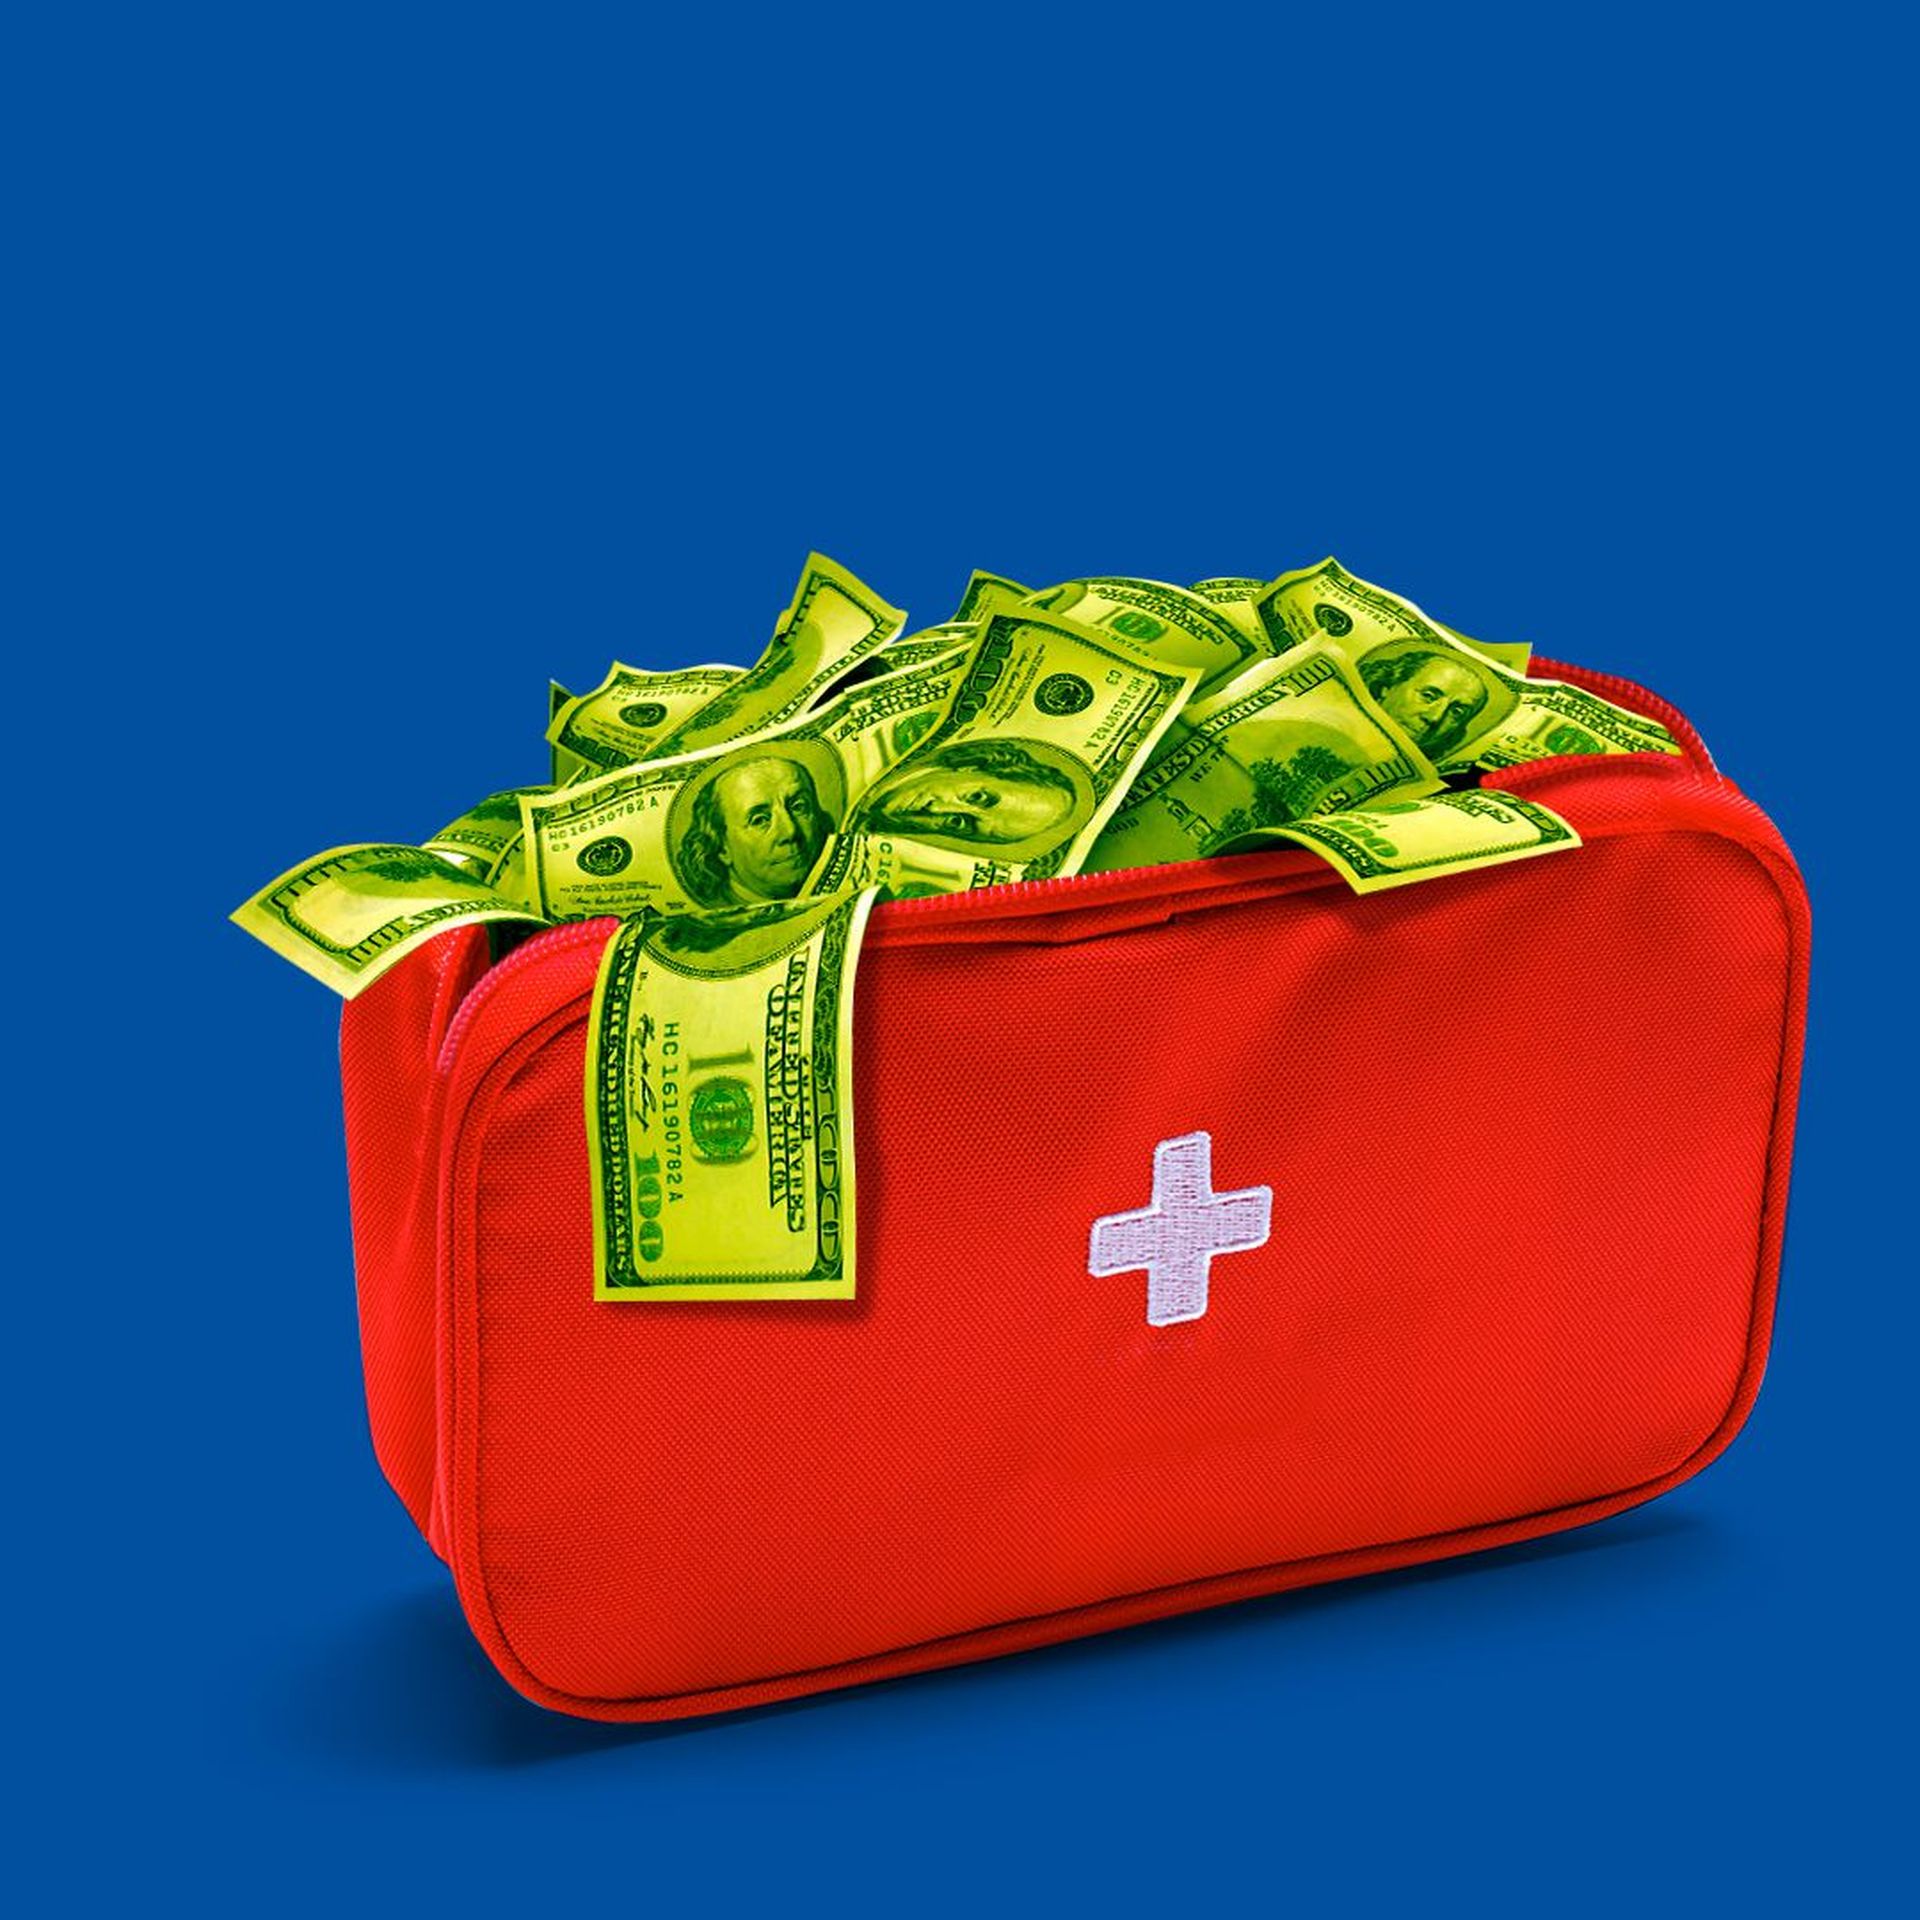 Illustration of a first aid bag filled with cash.   